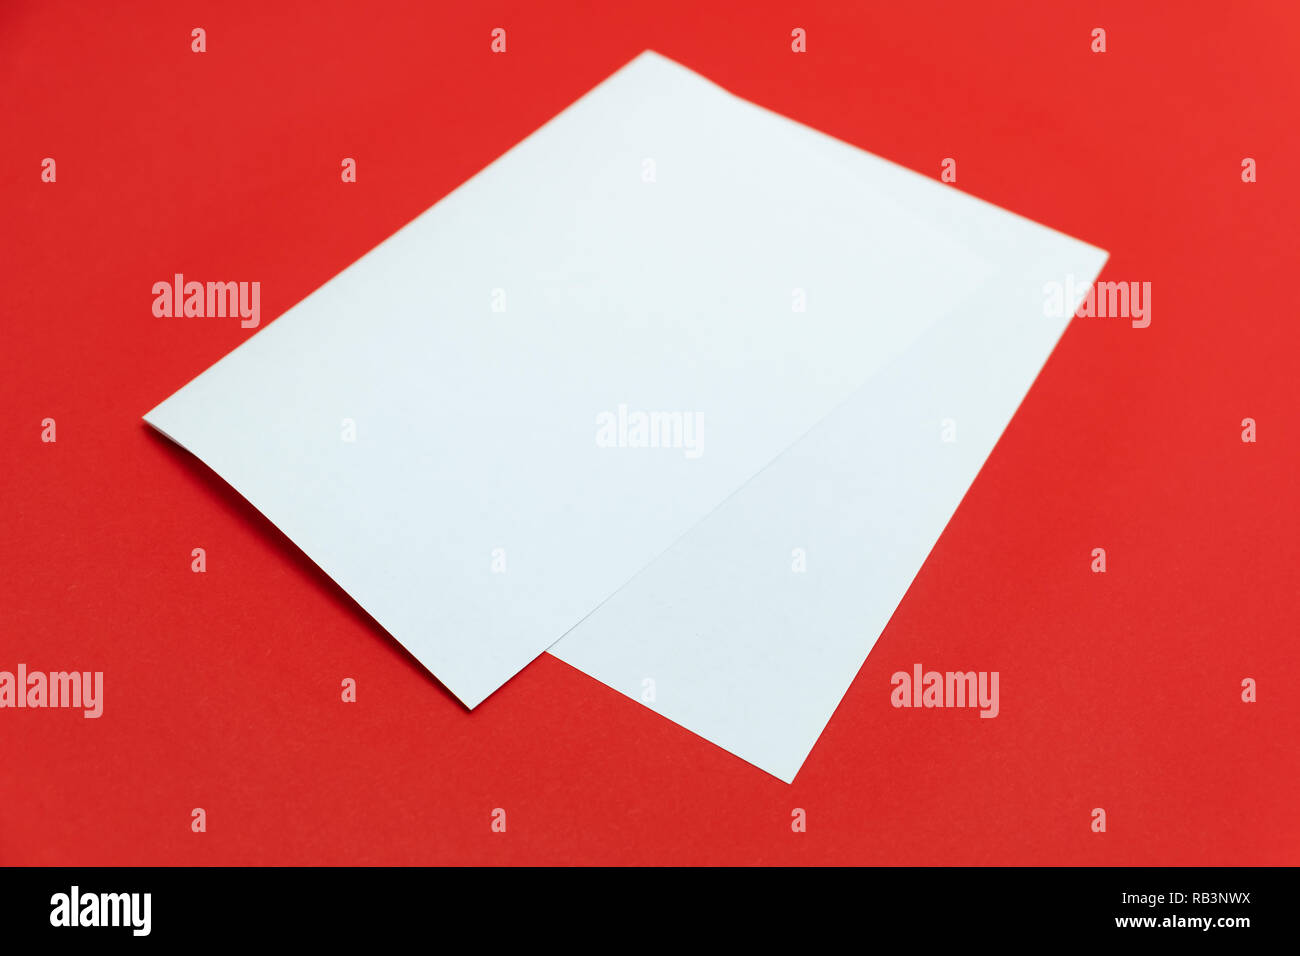 Blank paper sheet on bright red background. Close-up view of bent white paper laying on vivid colored table top Stock Photo